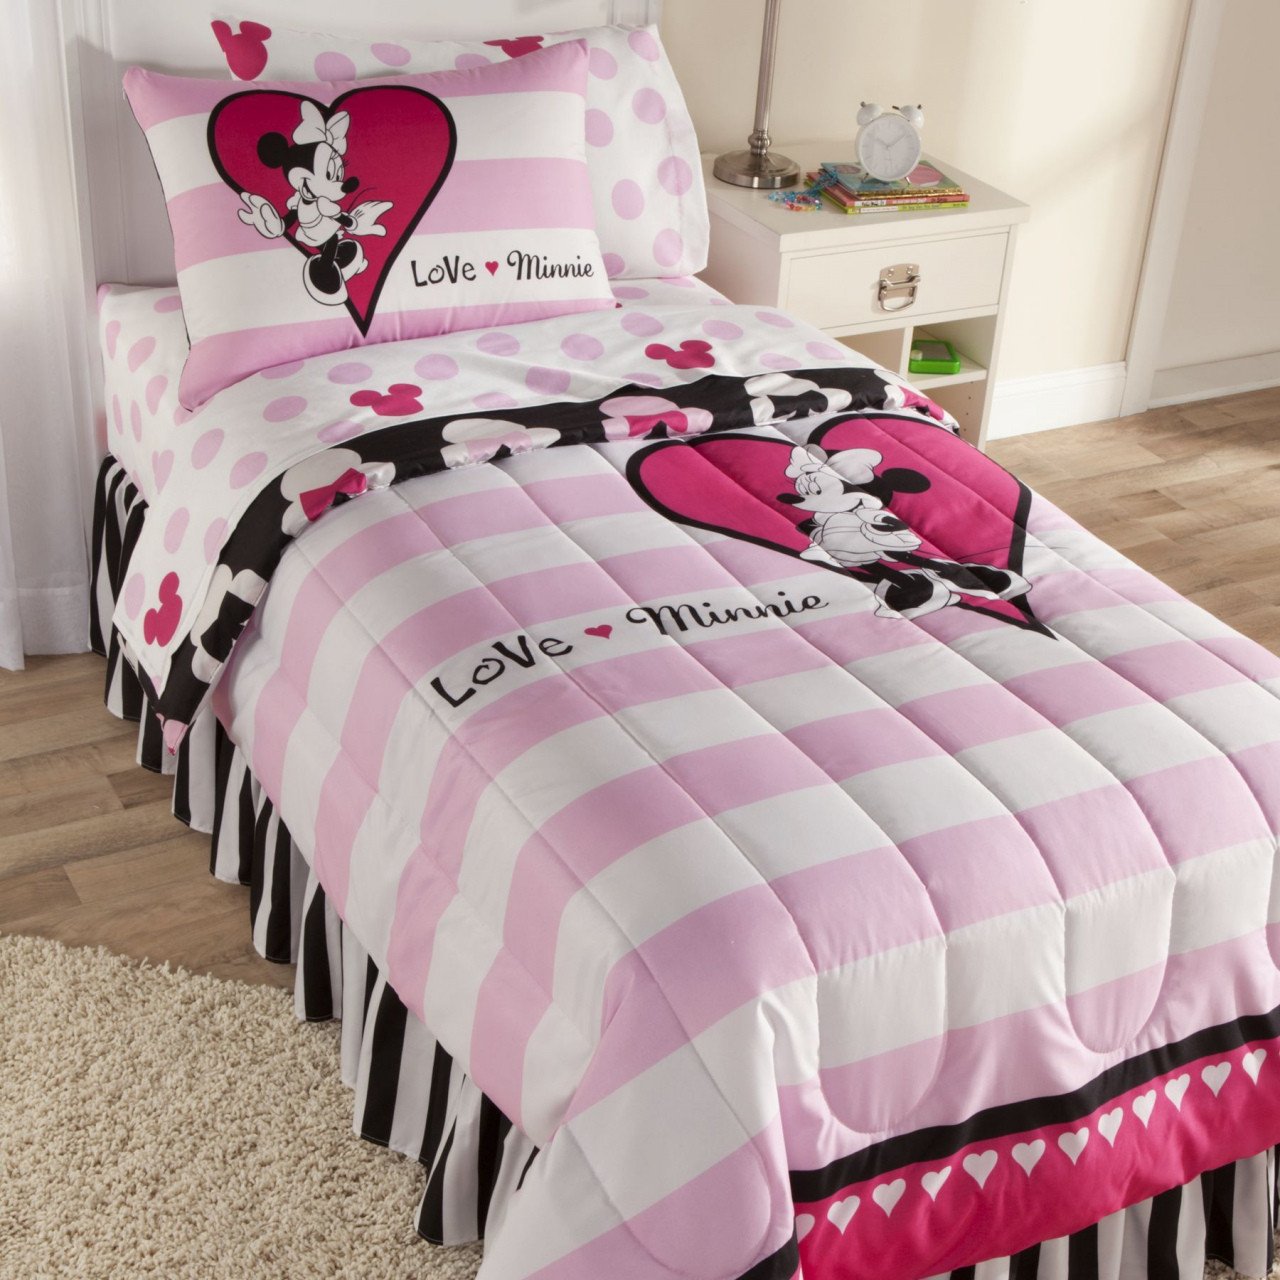 Minnie Mouse Bedroom Ideas Awesome Minnie Mouse Bedroom Set Full Size Decor Minnie Mouse